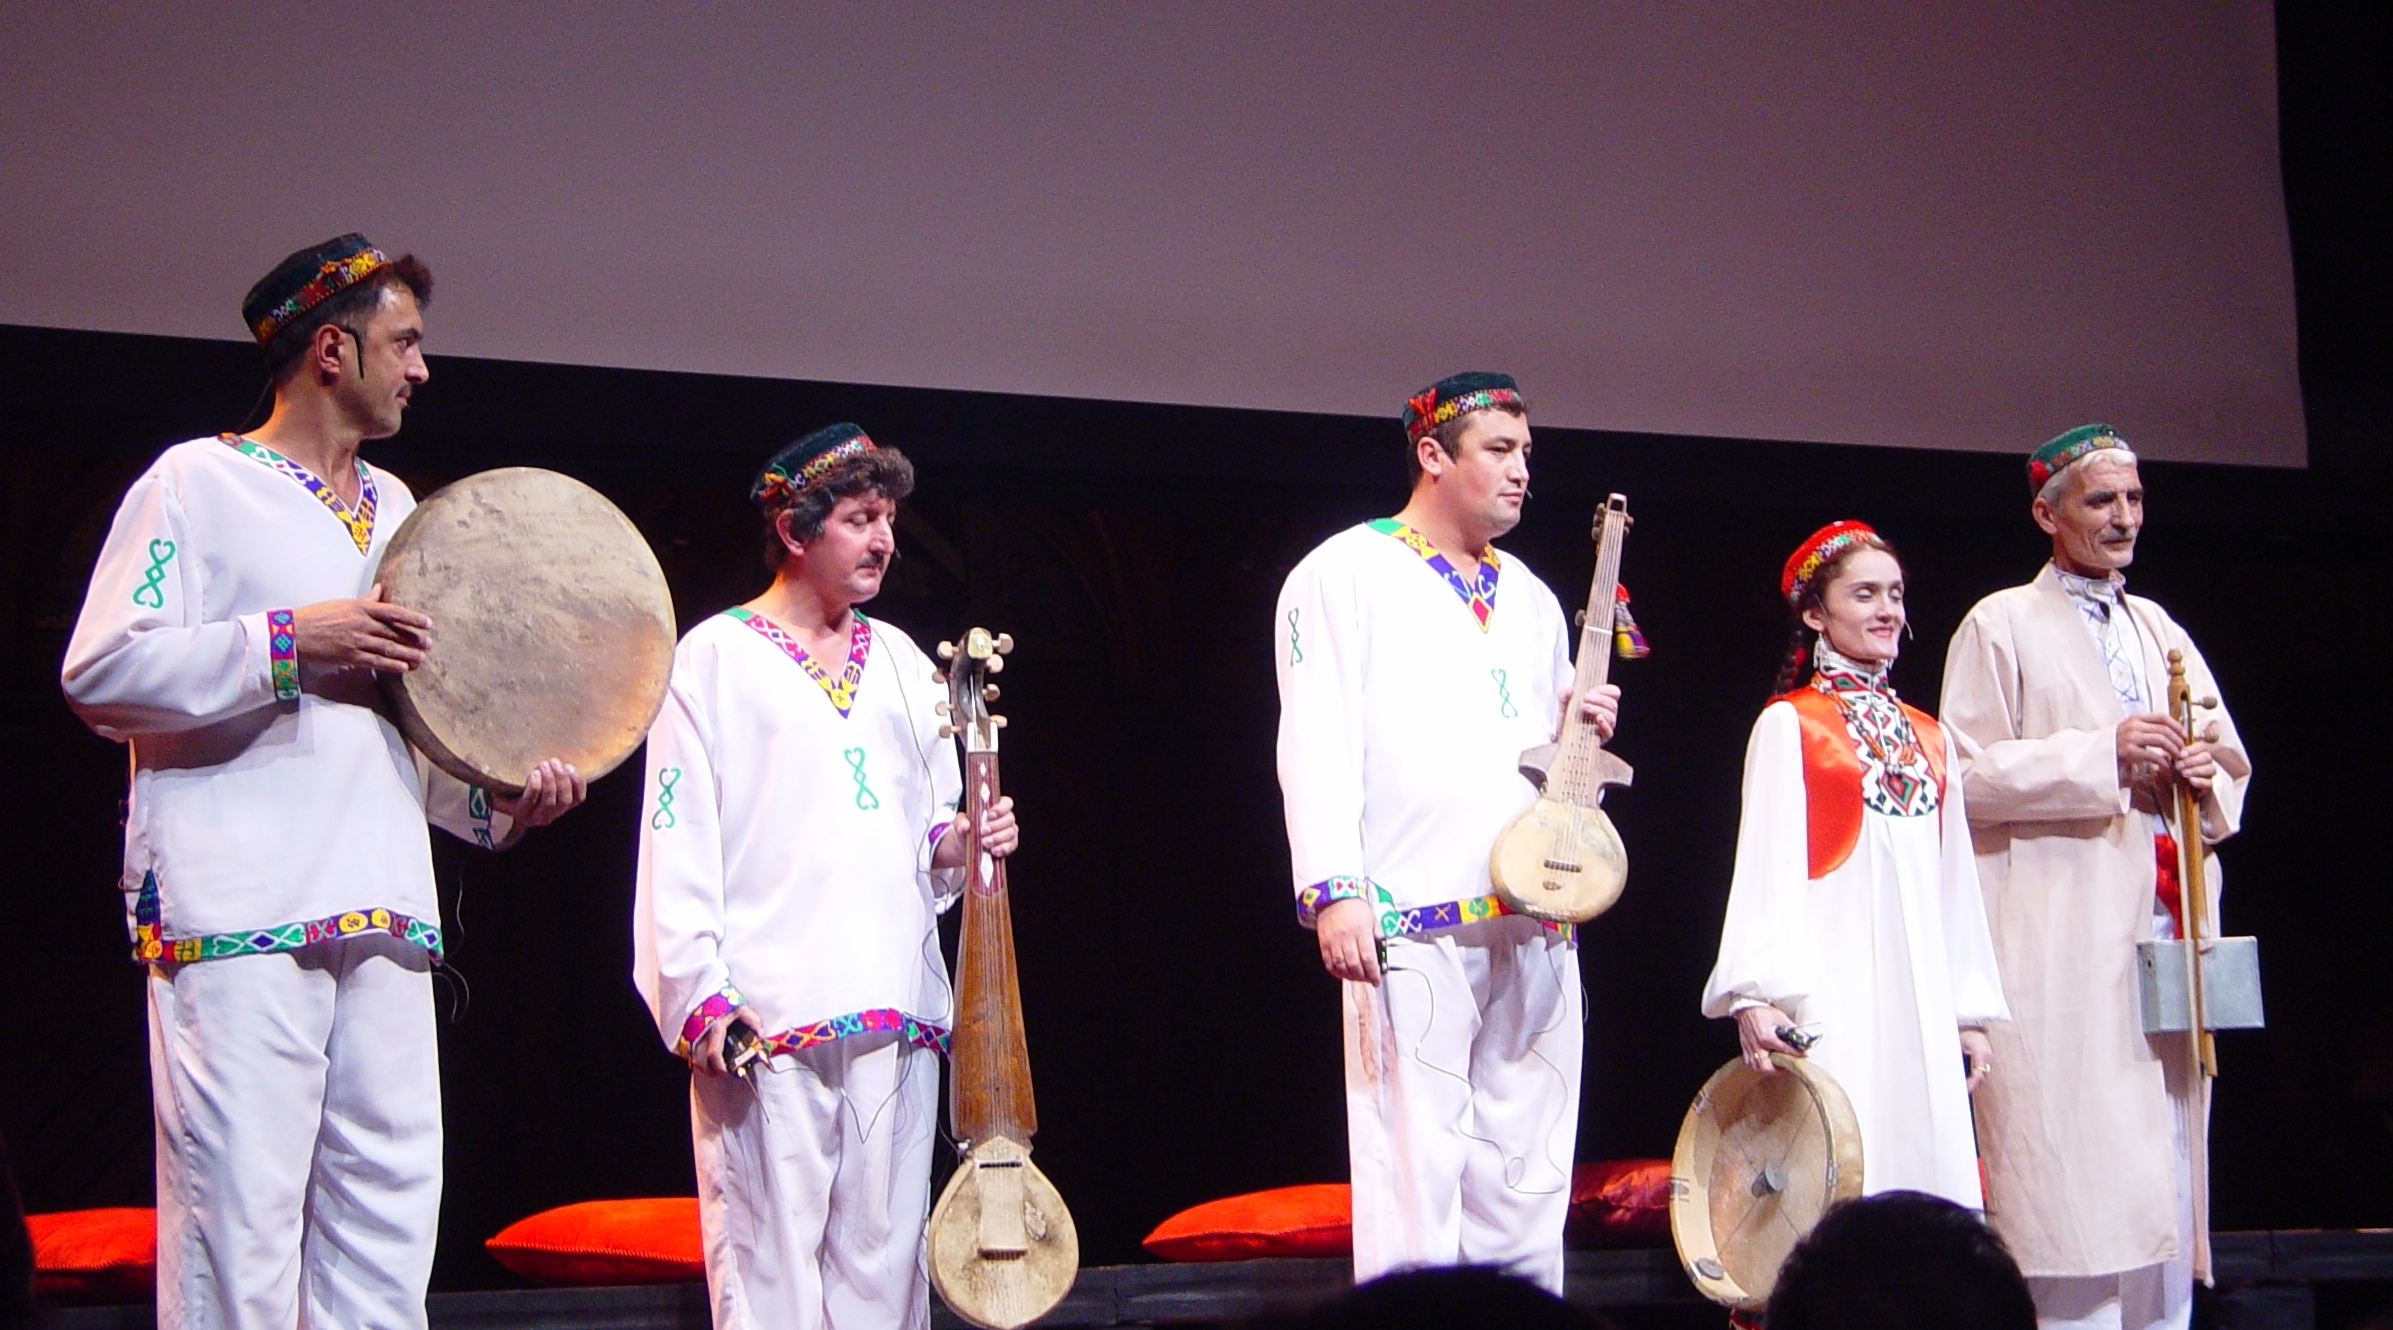 The Badakshan Ensemble of Tajikistan infused the air with exotic rhythms and cadences using the daf (drum), the Pamiri rubab (lute) and the ancient ghijak (spike fiddle)    Photo: Aftab Chagani  